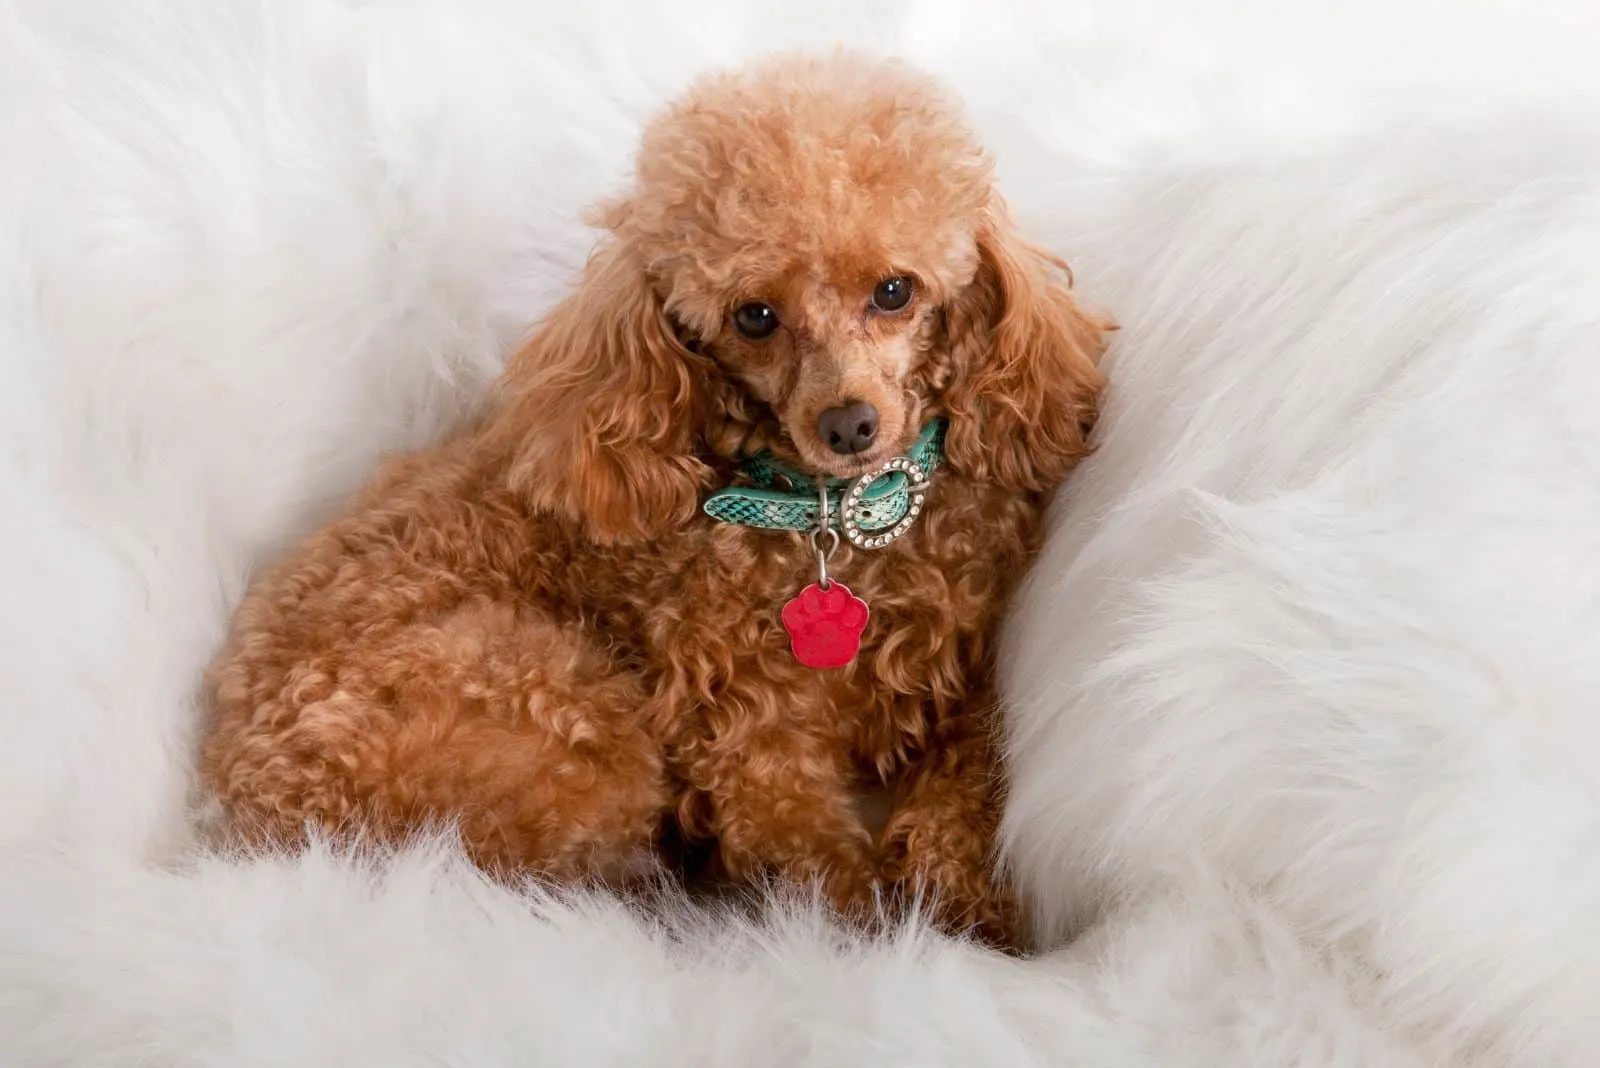 pampered toy poodle resting on white fur coach